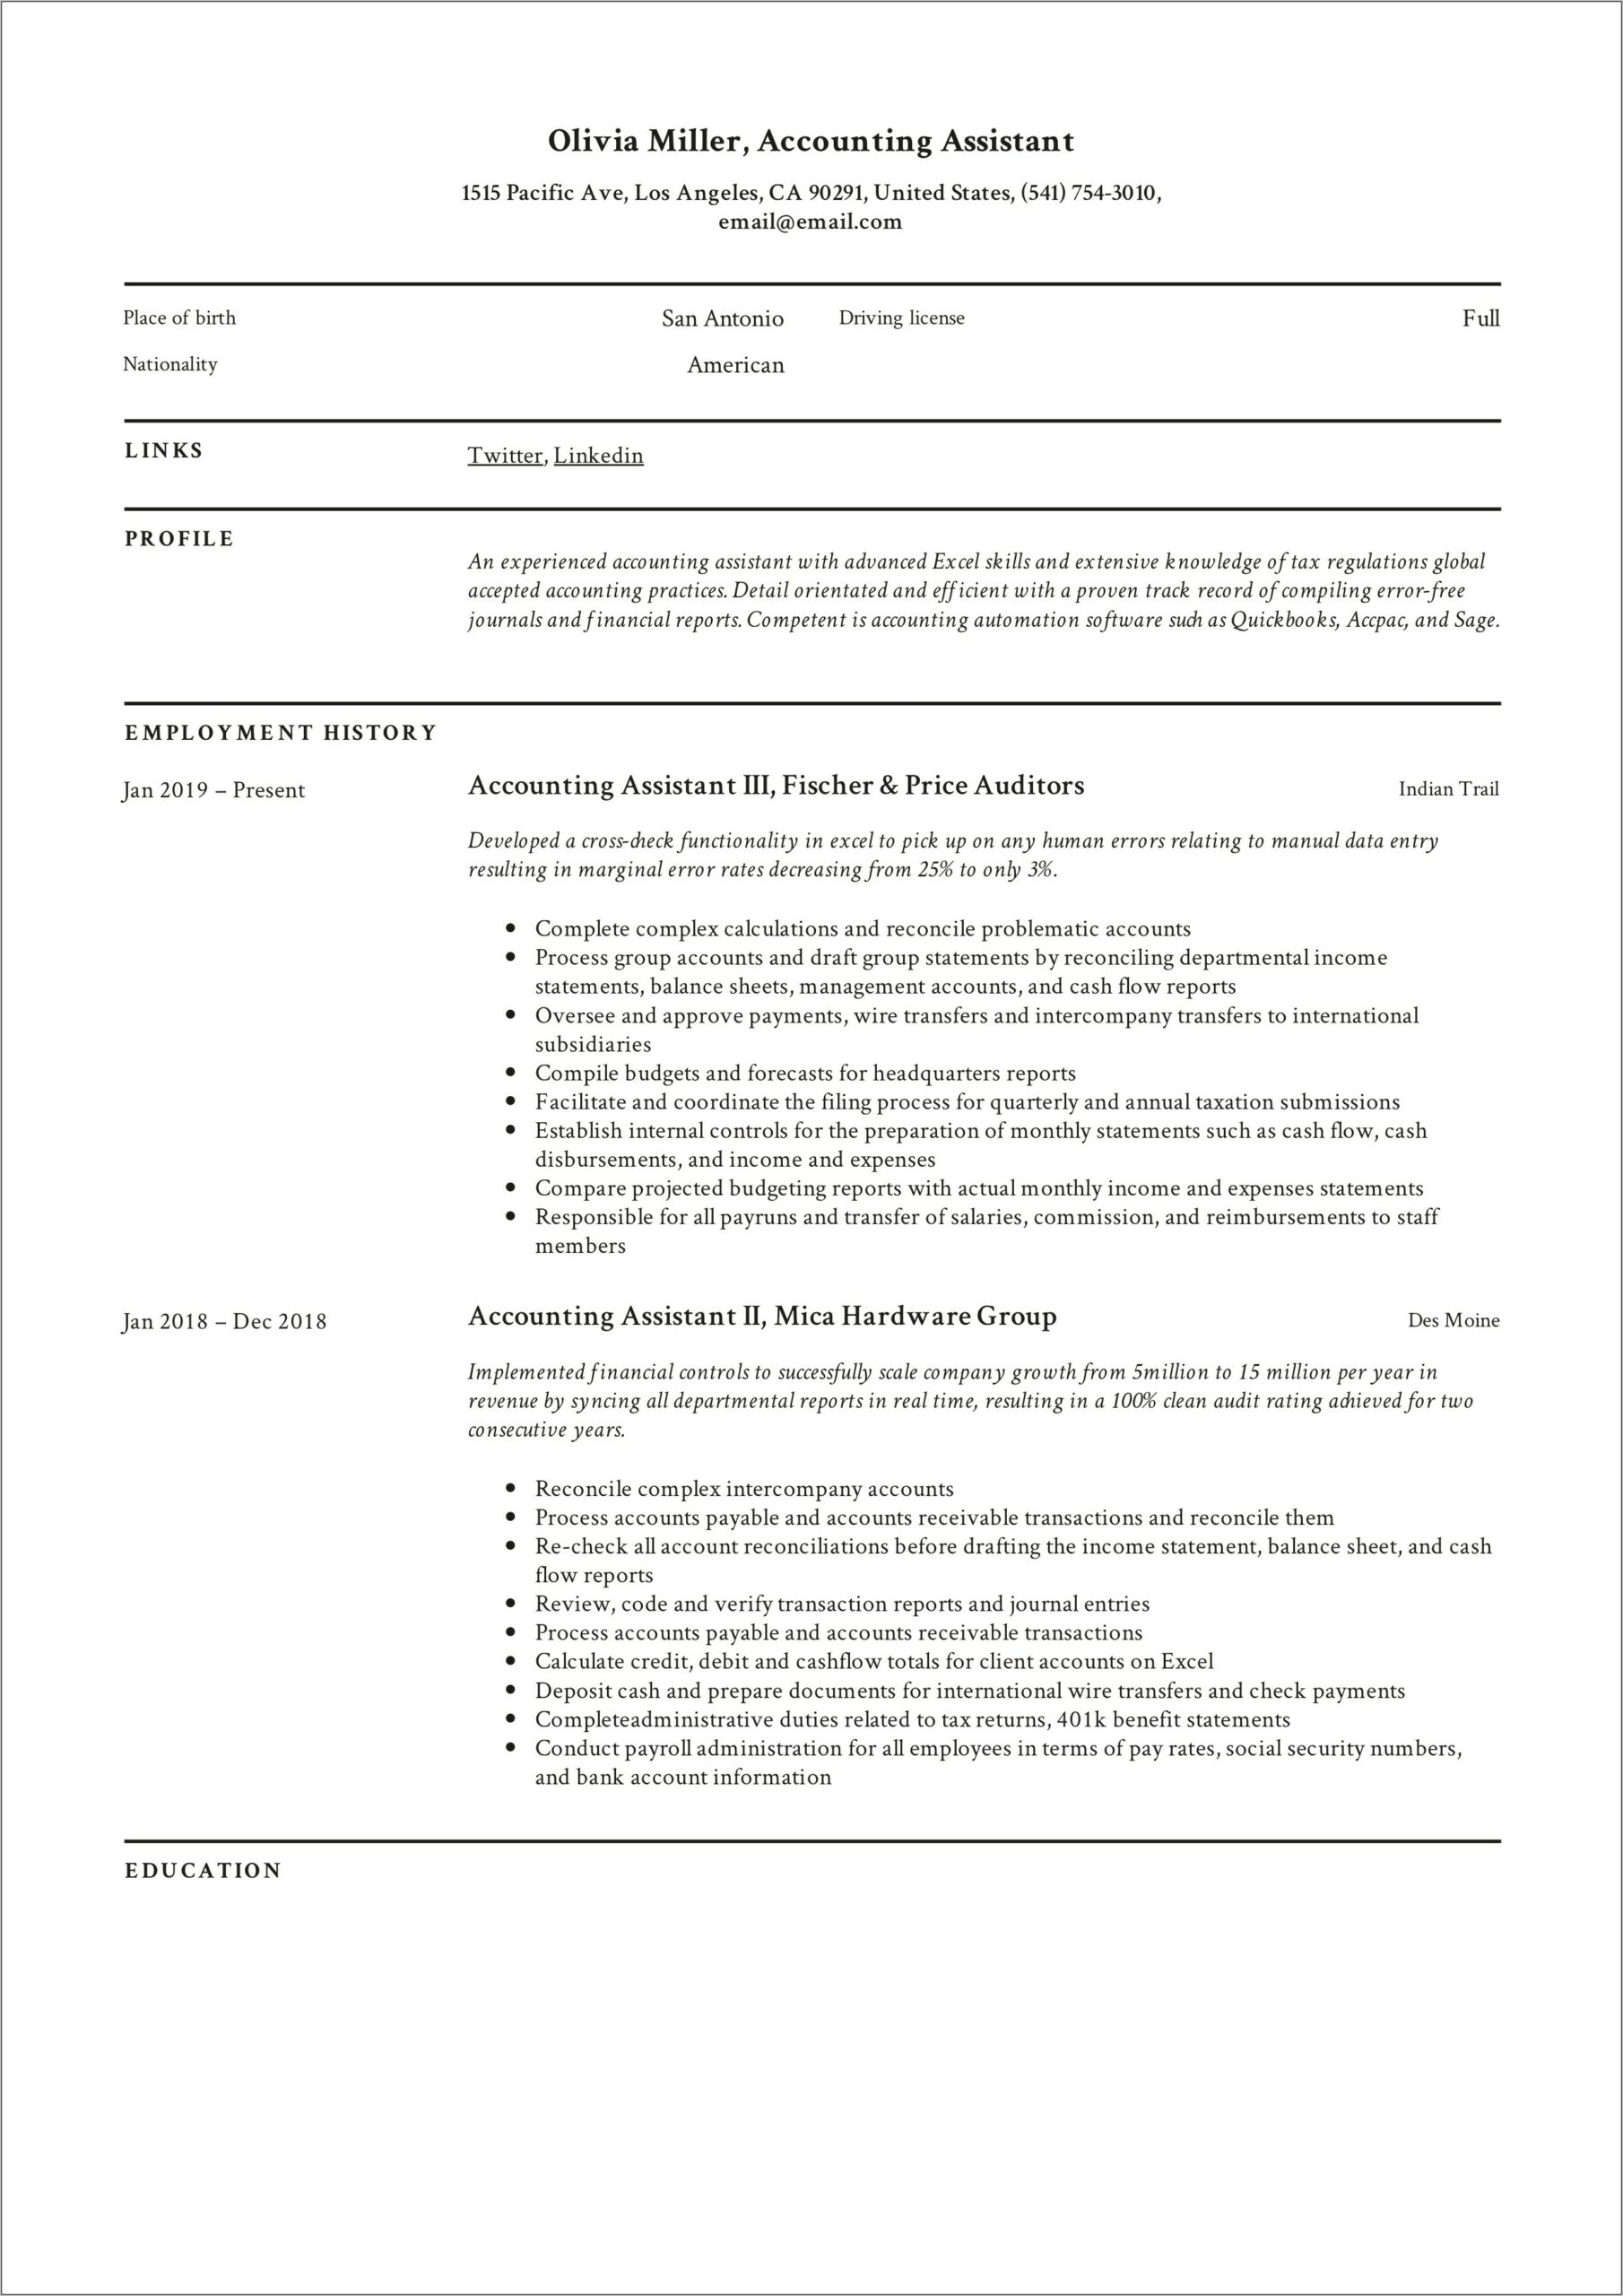 Resume Objective For Accounting Technician